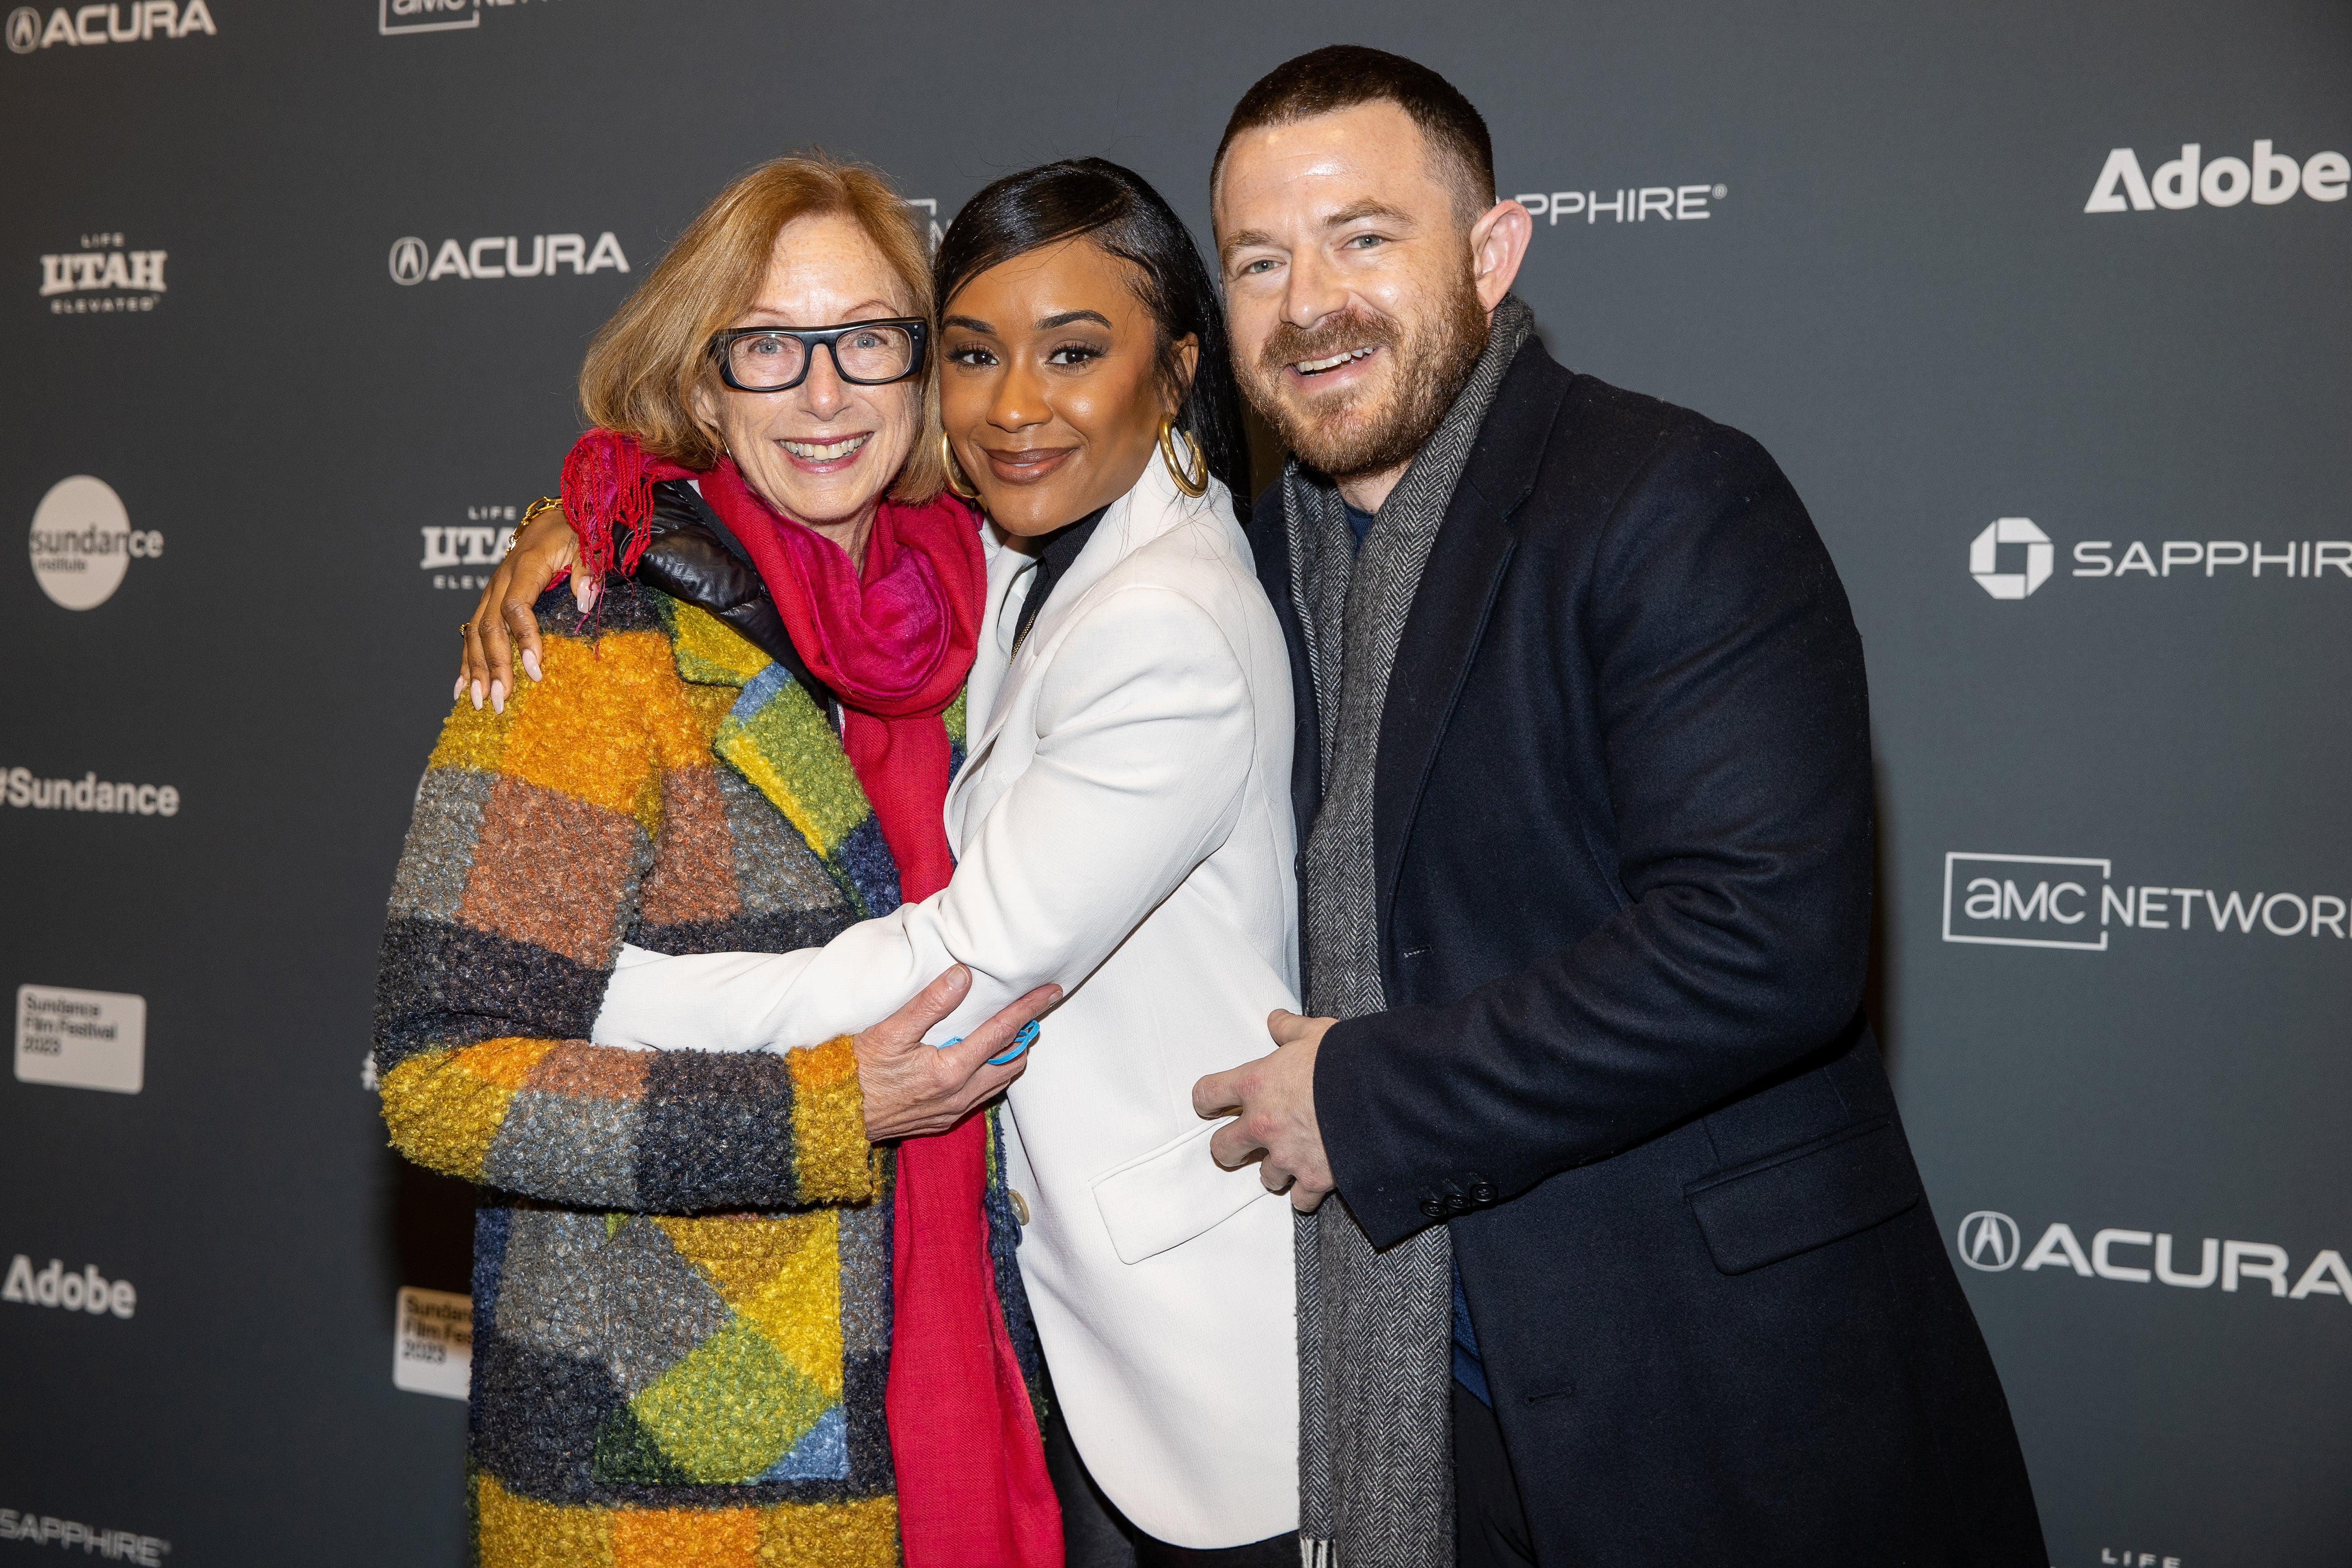 Michelle Satter, A.V. Rockwell, and Michael Latt attend the 2023 Sundance Film Festival "A Thousand And One" Premiere at The Ray Theatre on January 22, 2023 in Park City, Utah